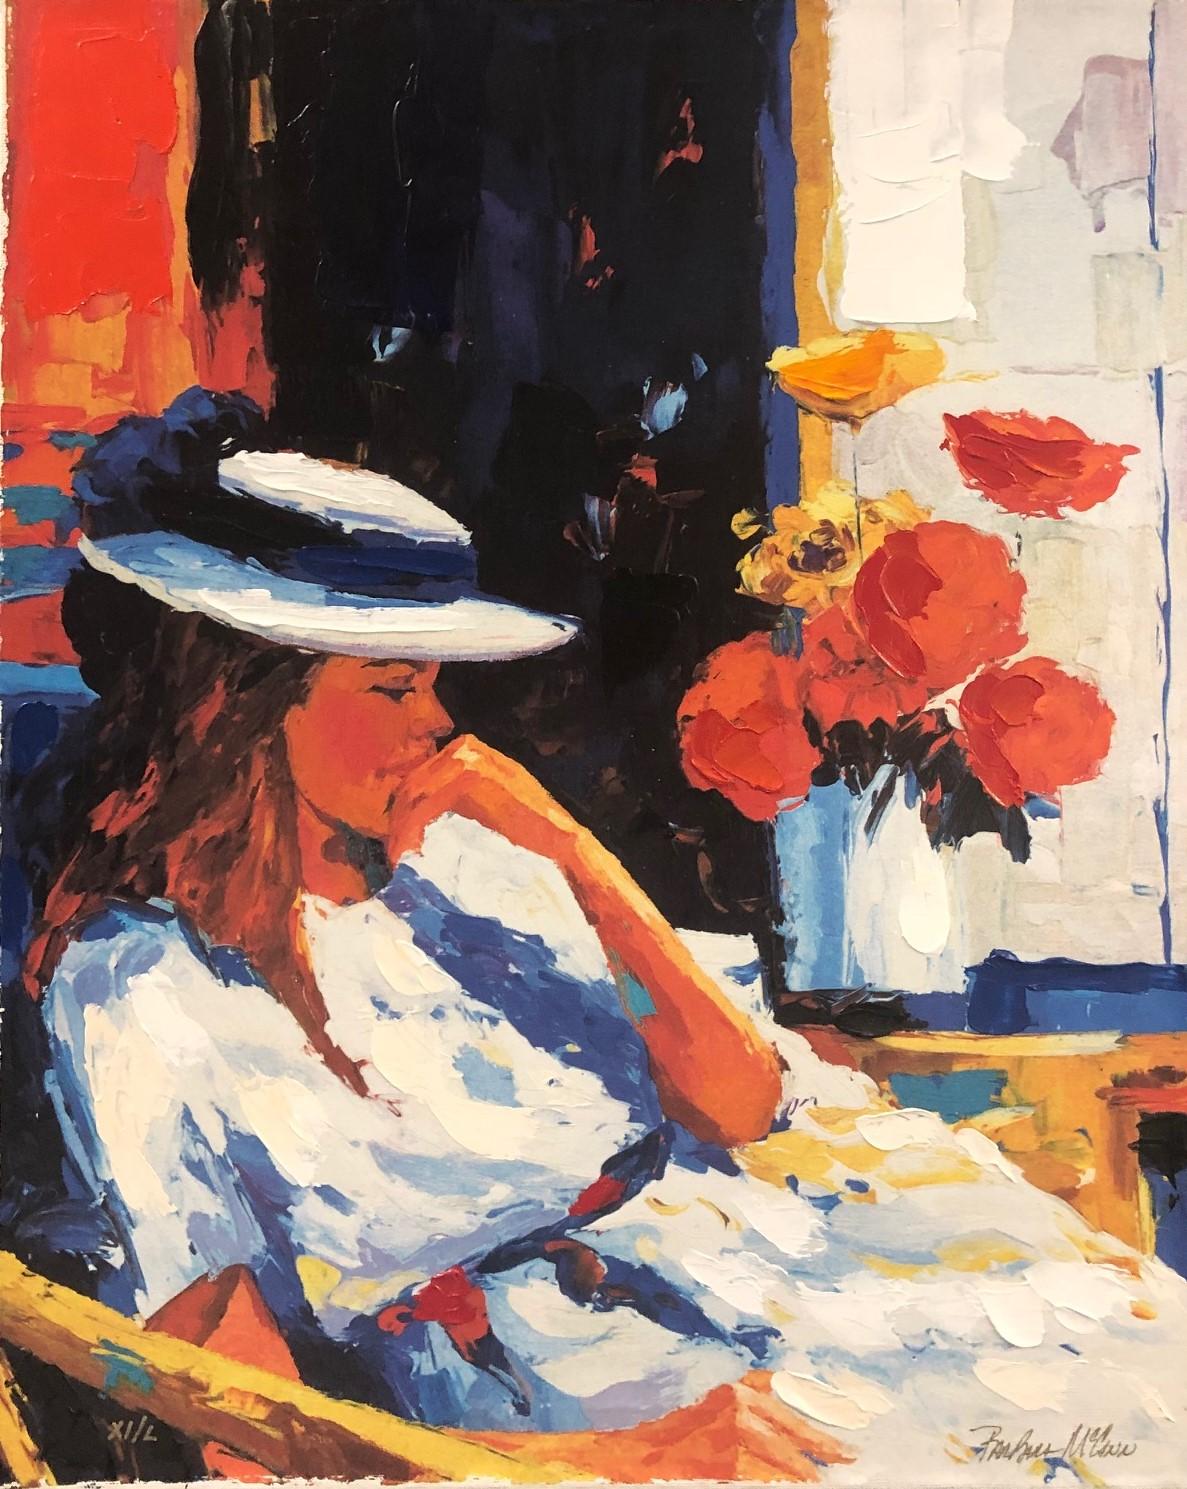 Barbara McCann Portrait Print - "Contemplation from the Flora Suite" Limited Edition Giclee on Canvas with COA